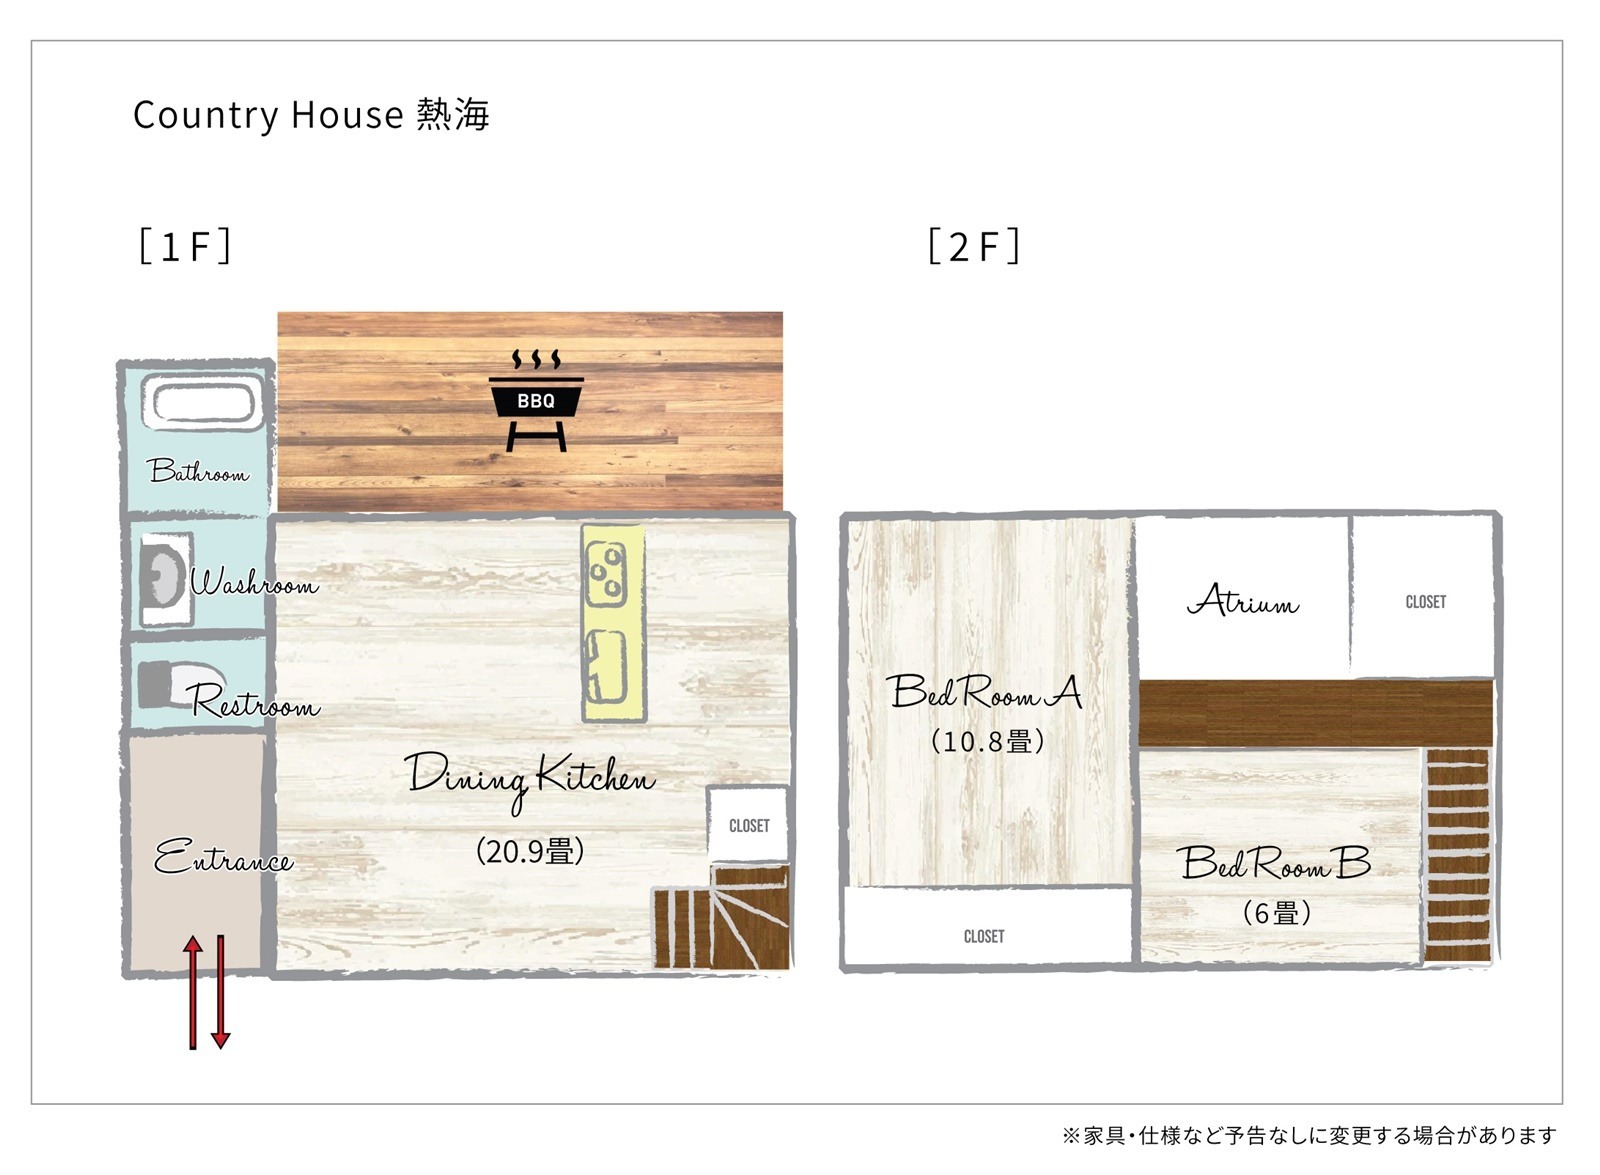 Country House 熱海